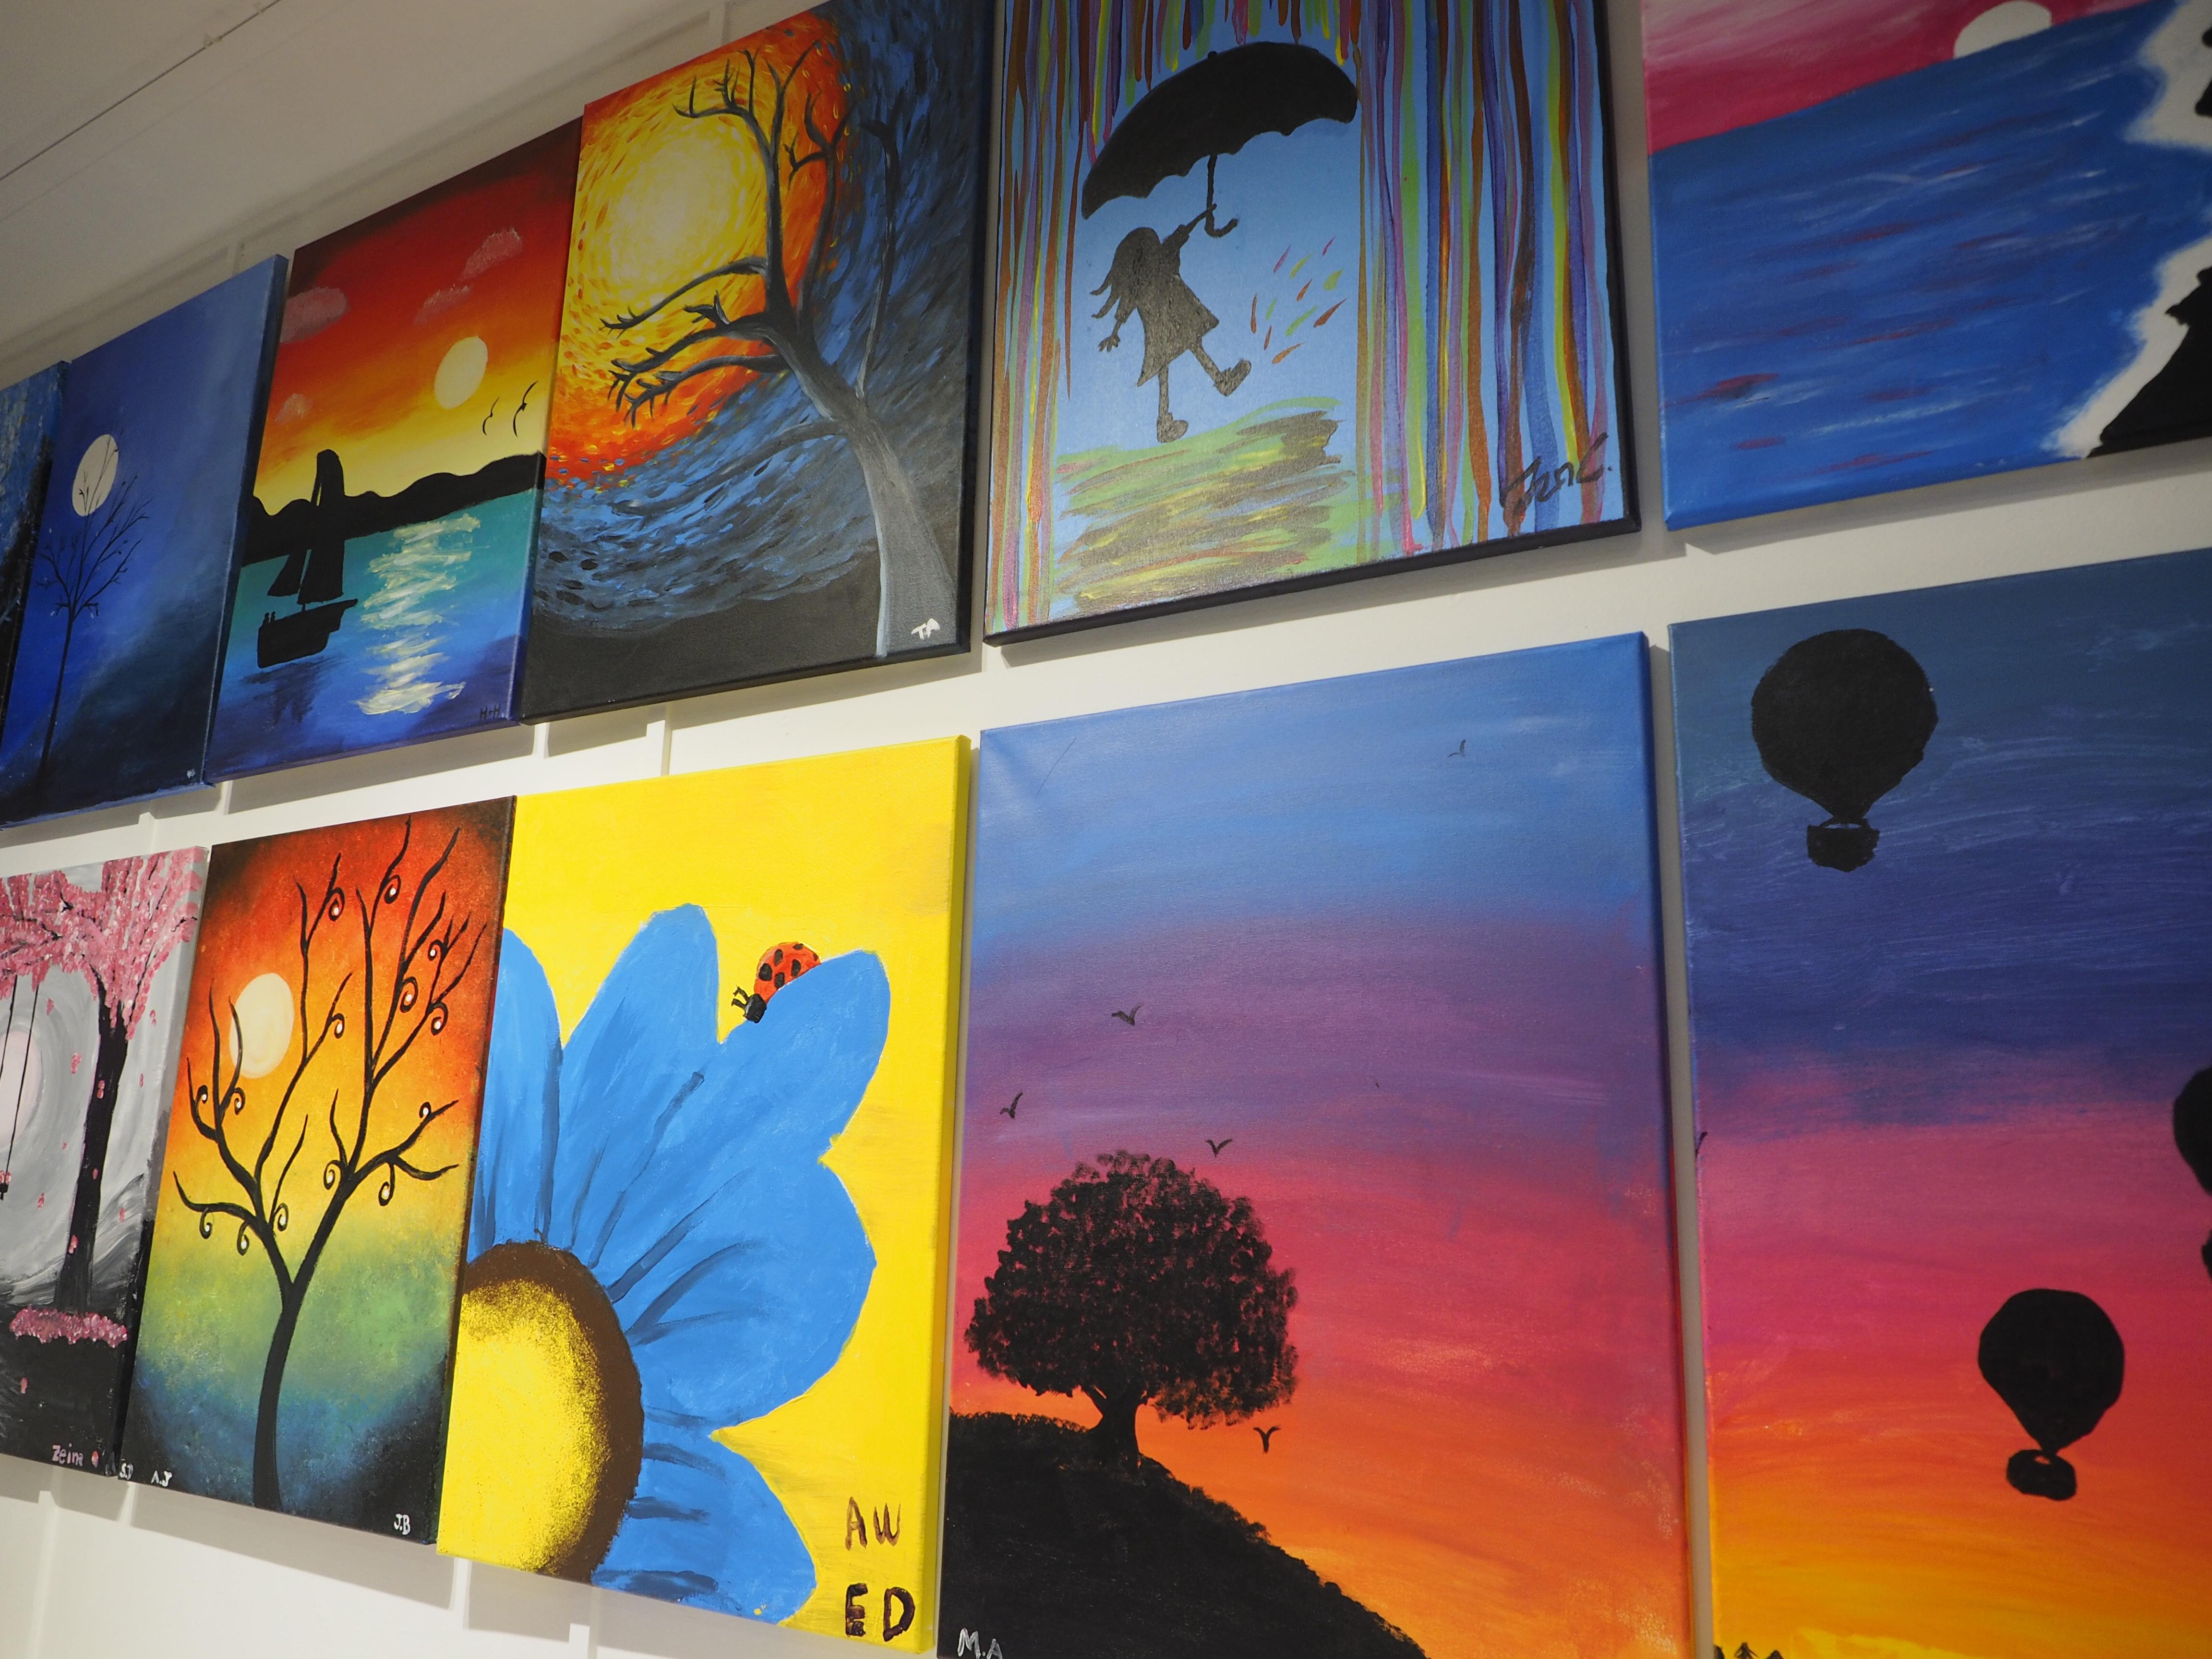 Photograph of several small, brightly coloured paintings depicting images like trees and seascapes hung tightly next to one another on a wall